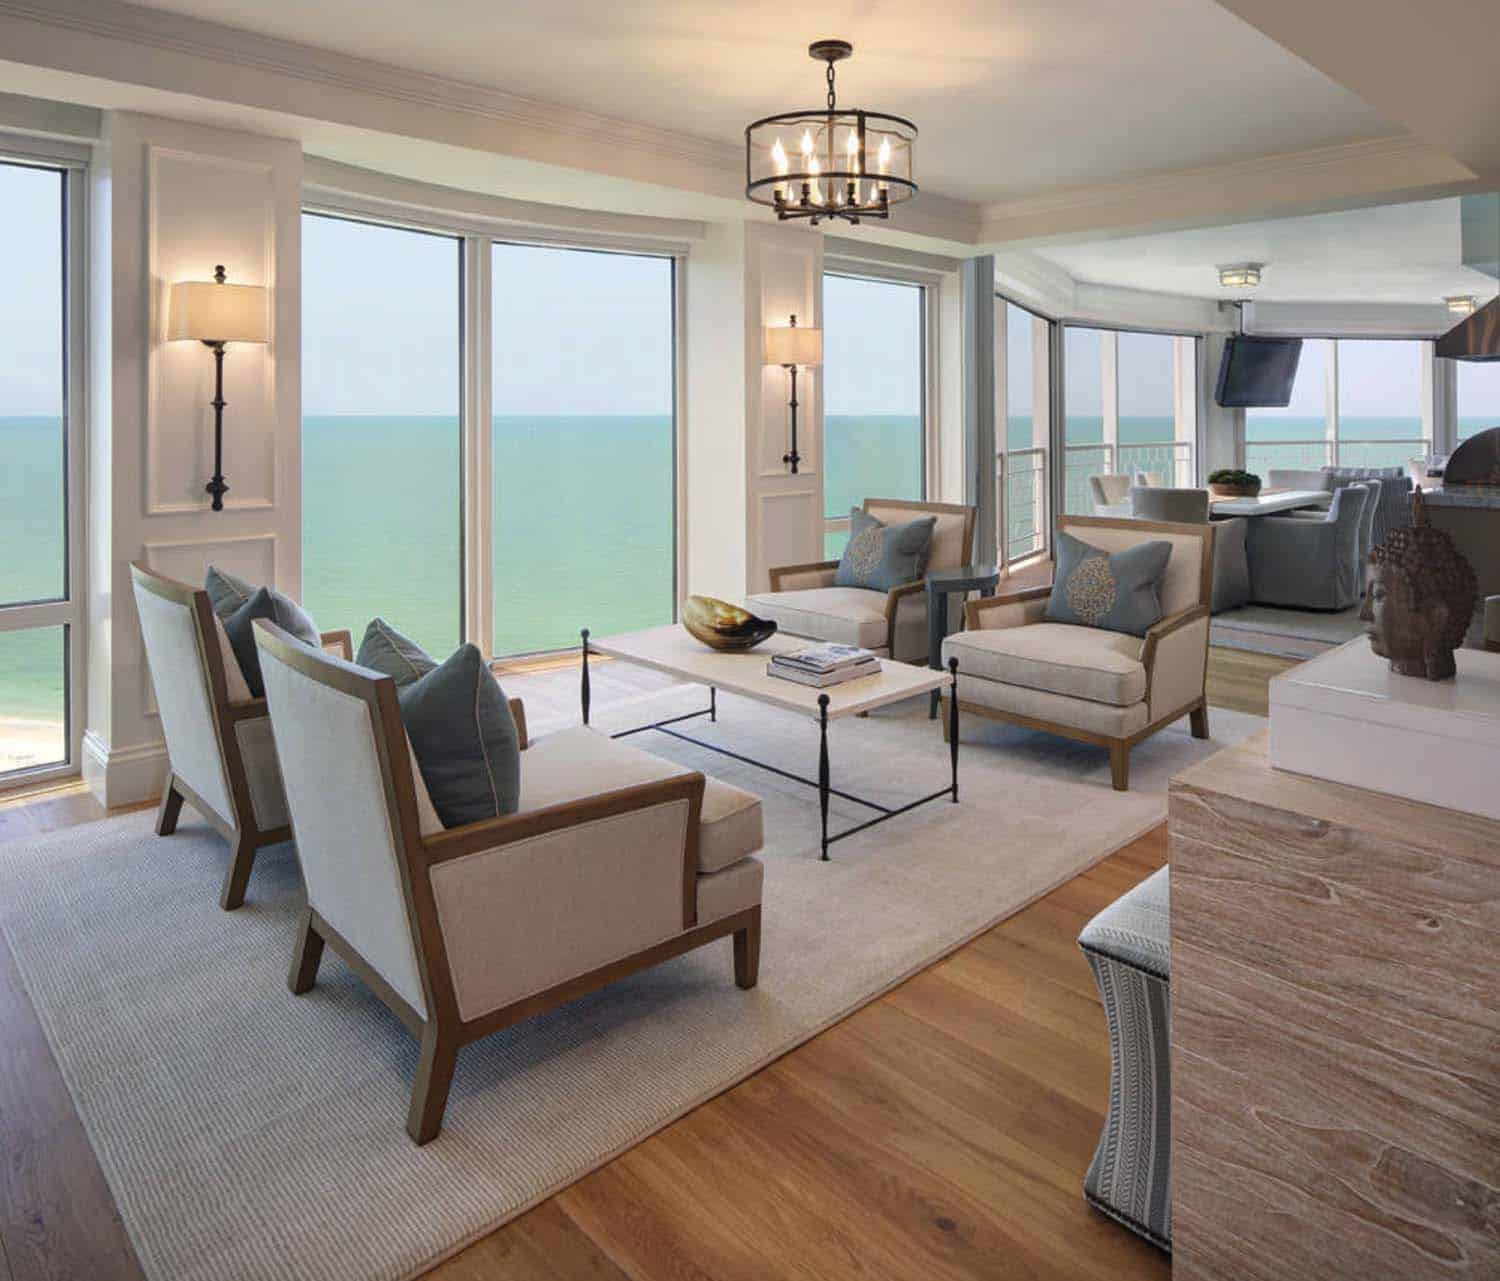 Beach style condo boasts magnificent views of the Gulf of Mexico